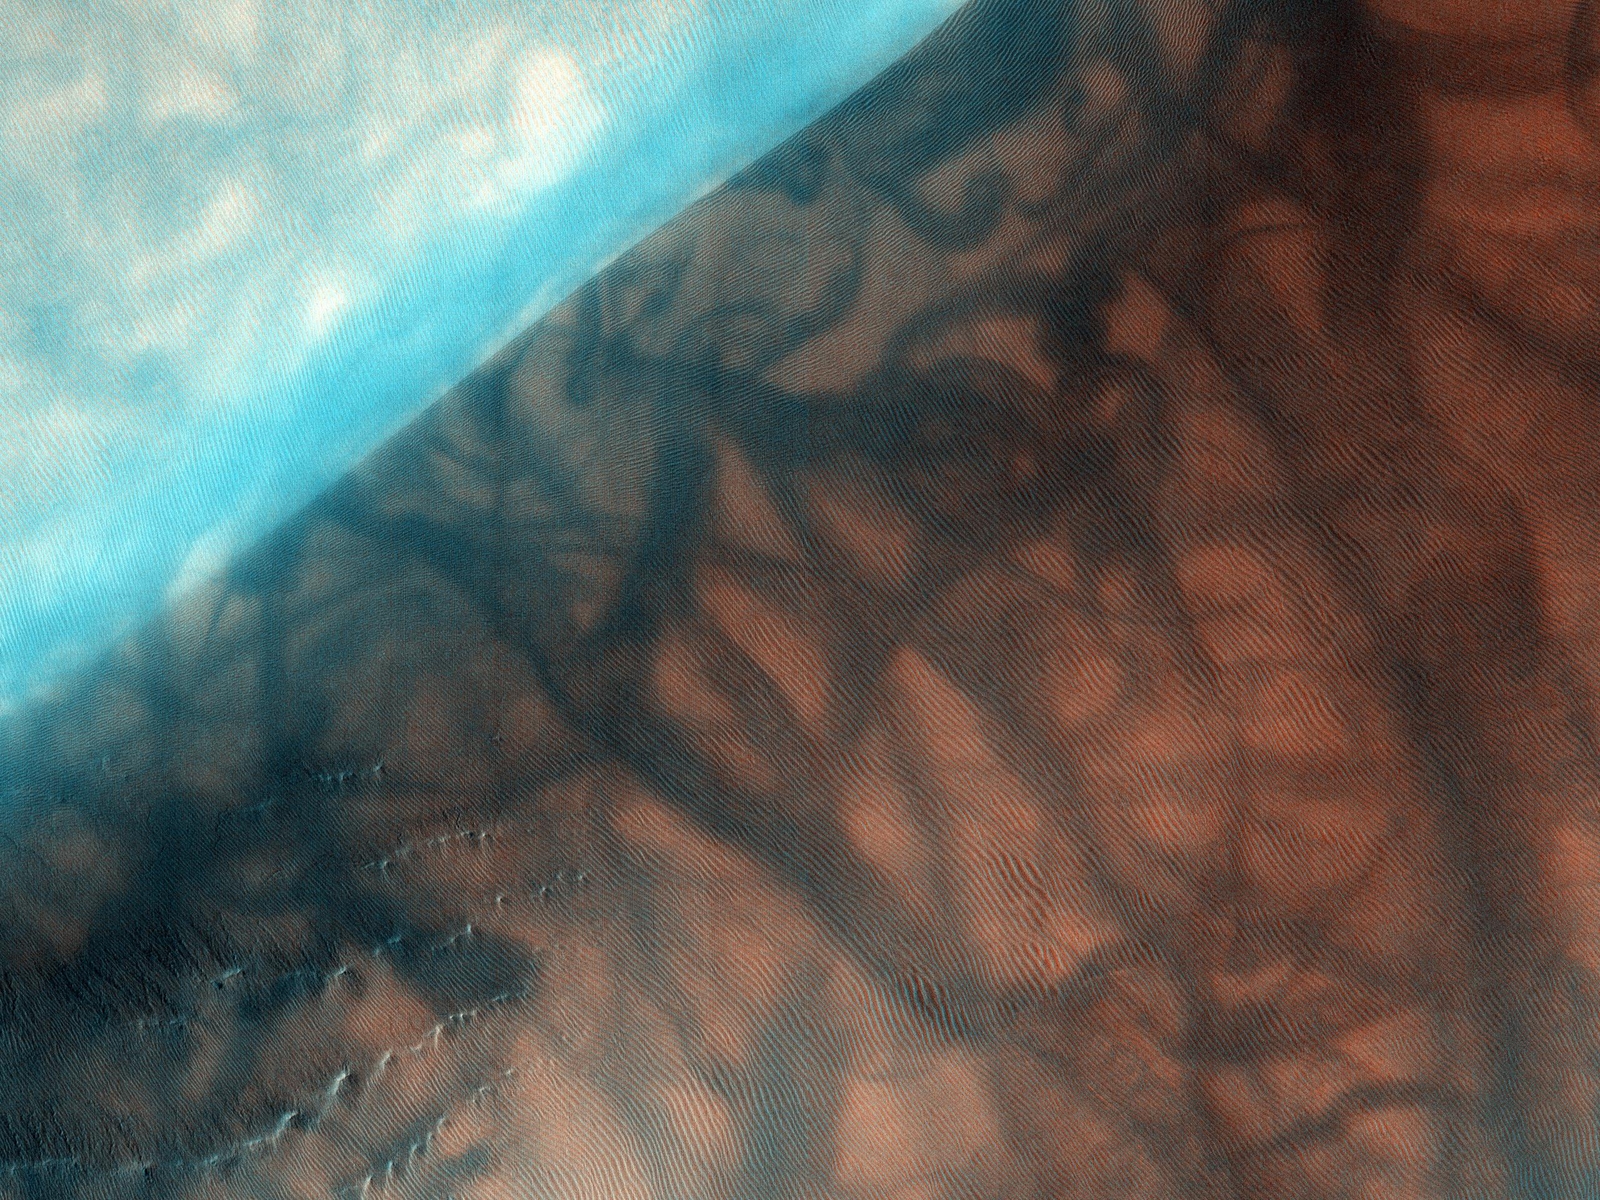 The Russell Crater dune field is covered seasonally by carbon dioxide frost, and this image shows the dune field after the frost has sublimated (evaporated directly from solid to gas).